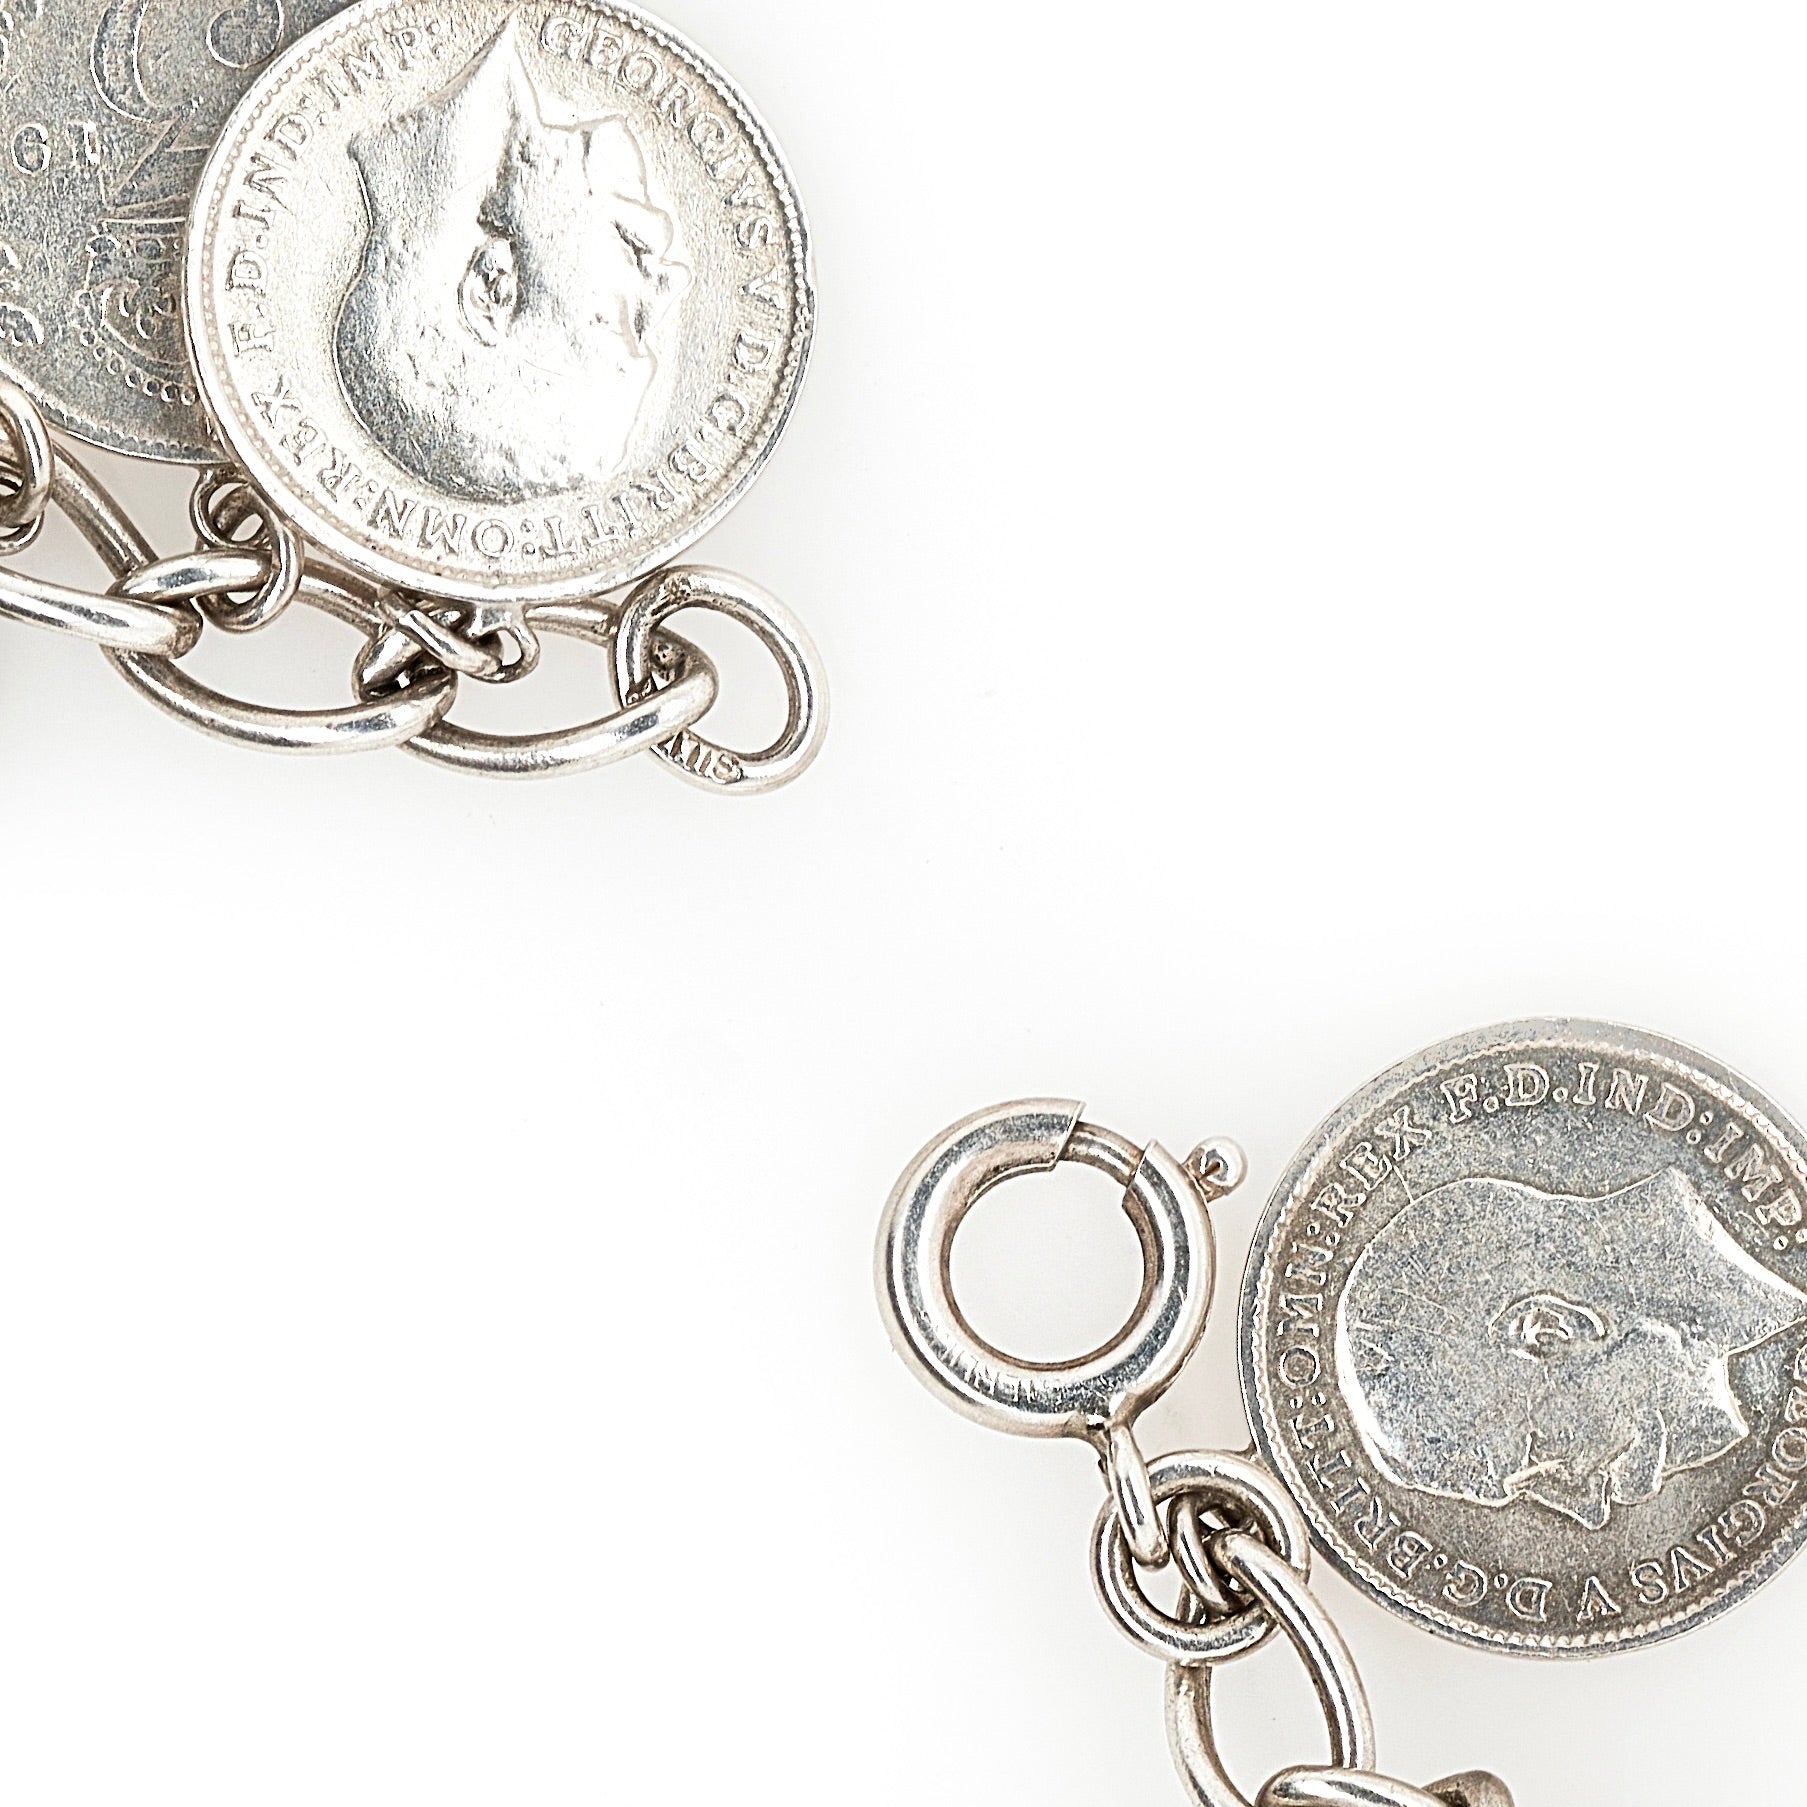 Edwardian and Victorian Silver Coin Bracelet